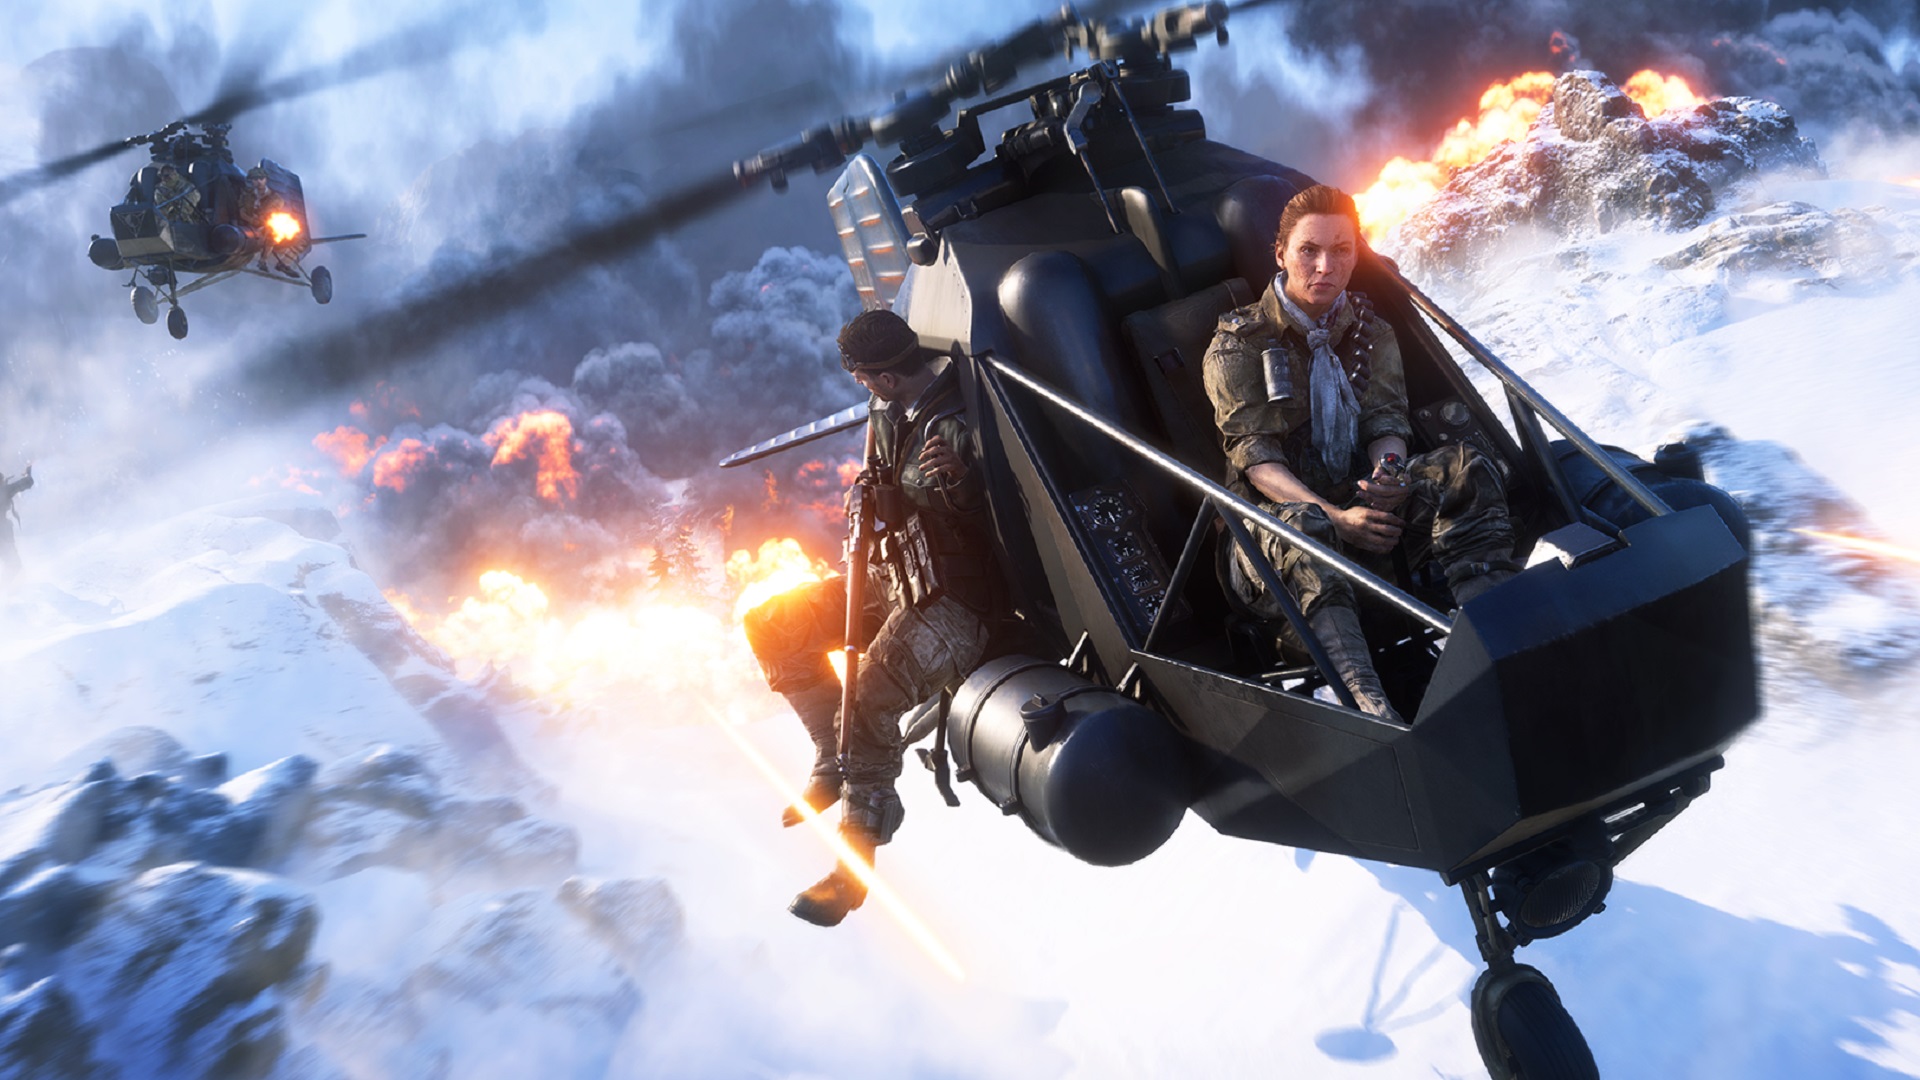 Will Your PC Run Battlefield 5? Here Are The Official System Requirements